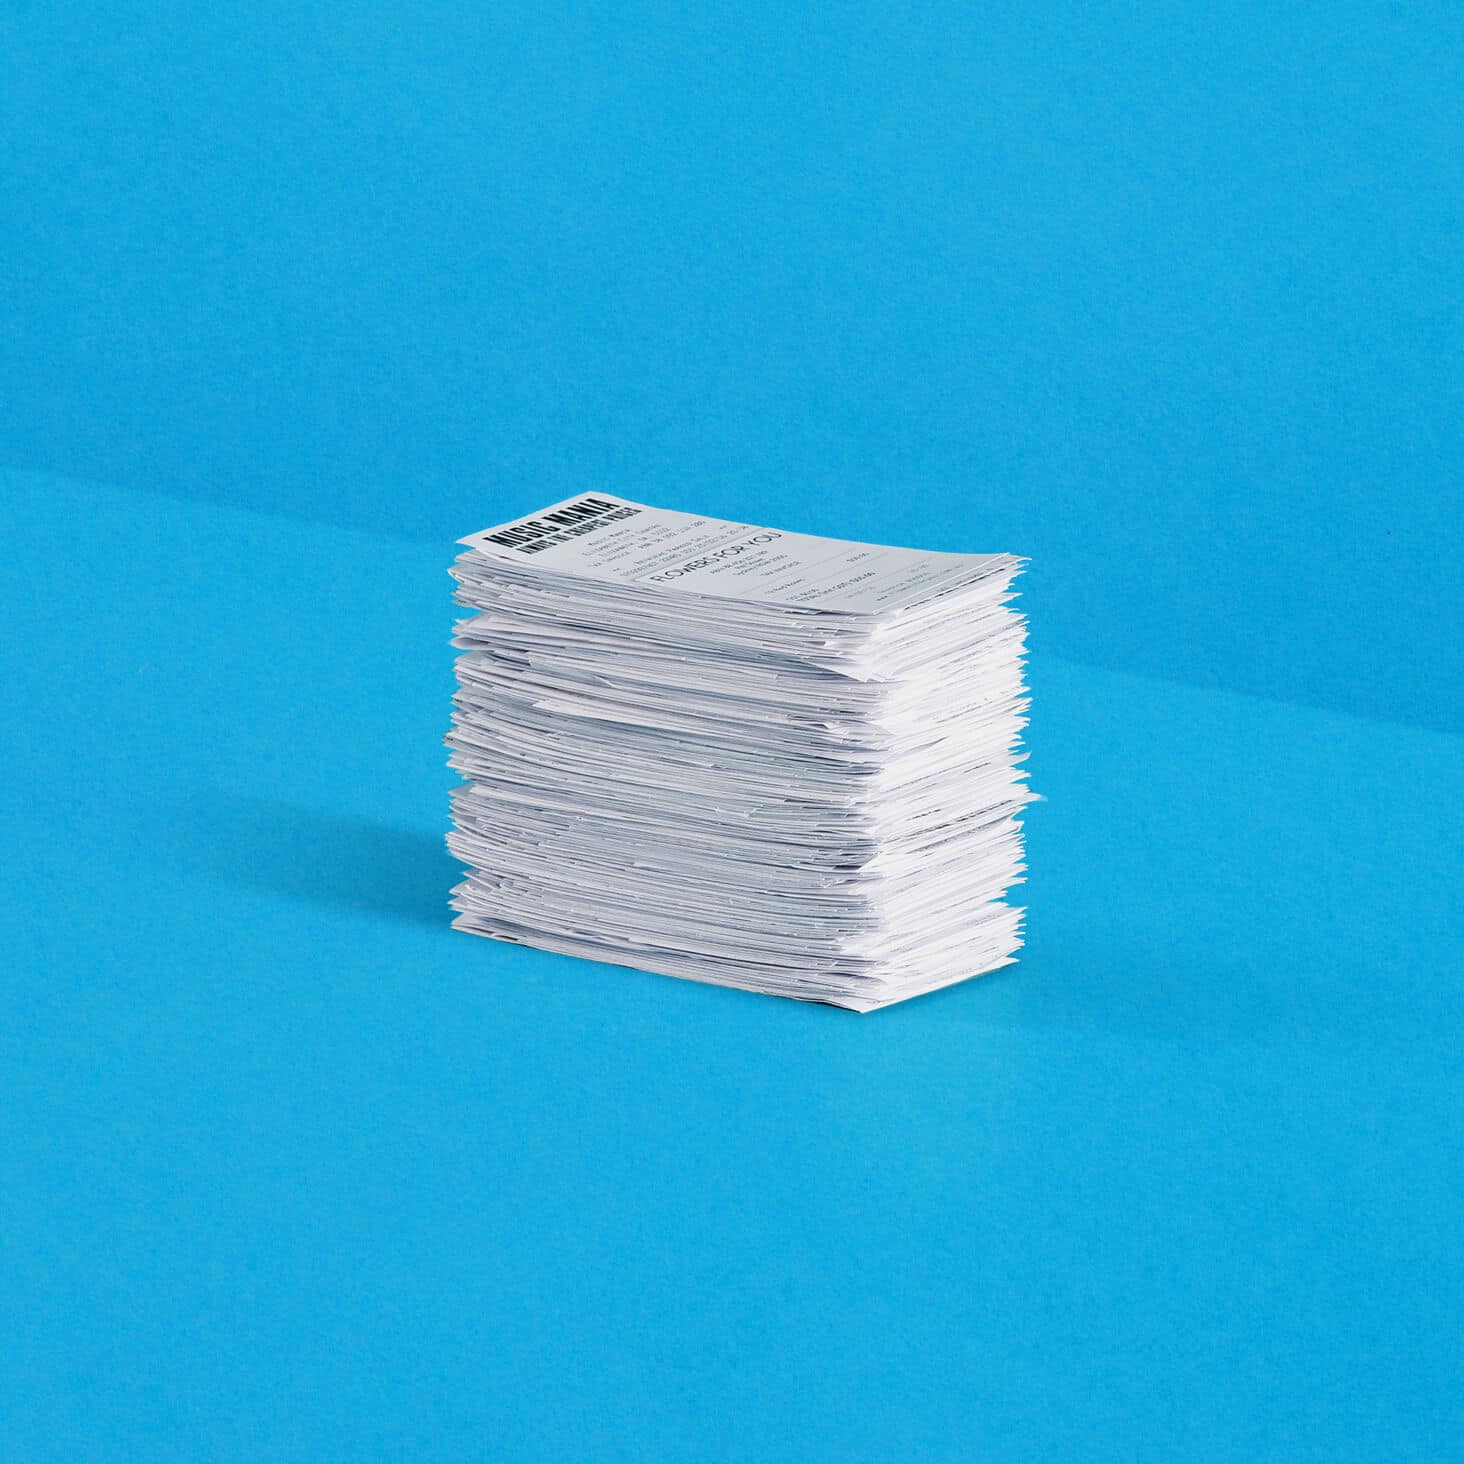 A large pile of receipts for employee expense claims are neatly stacked in a pile.